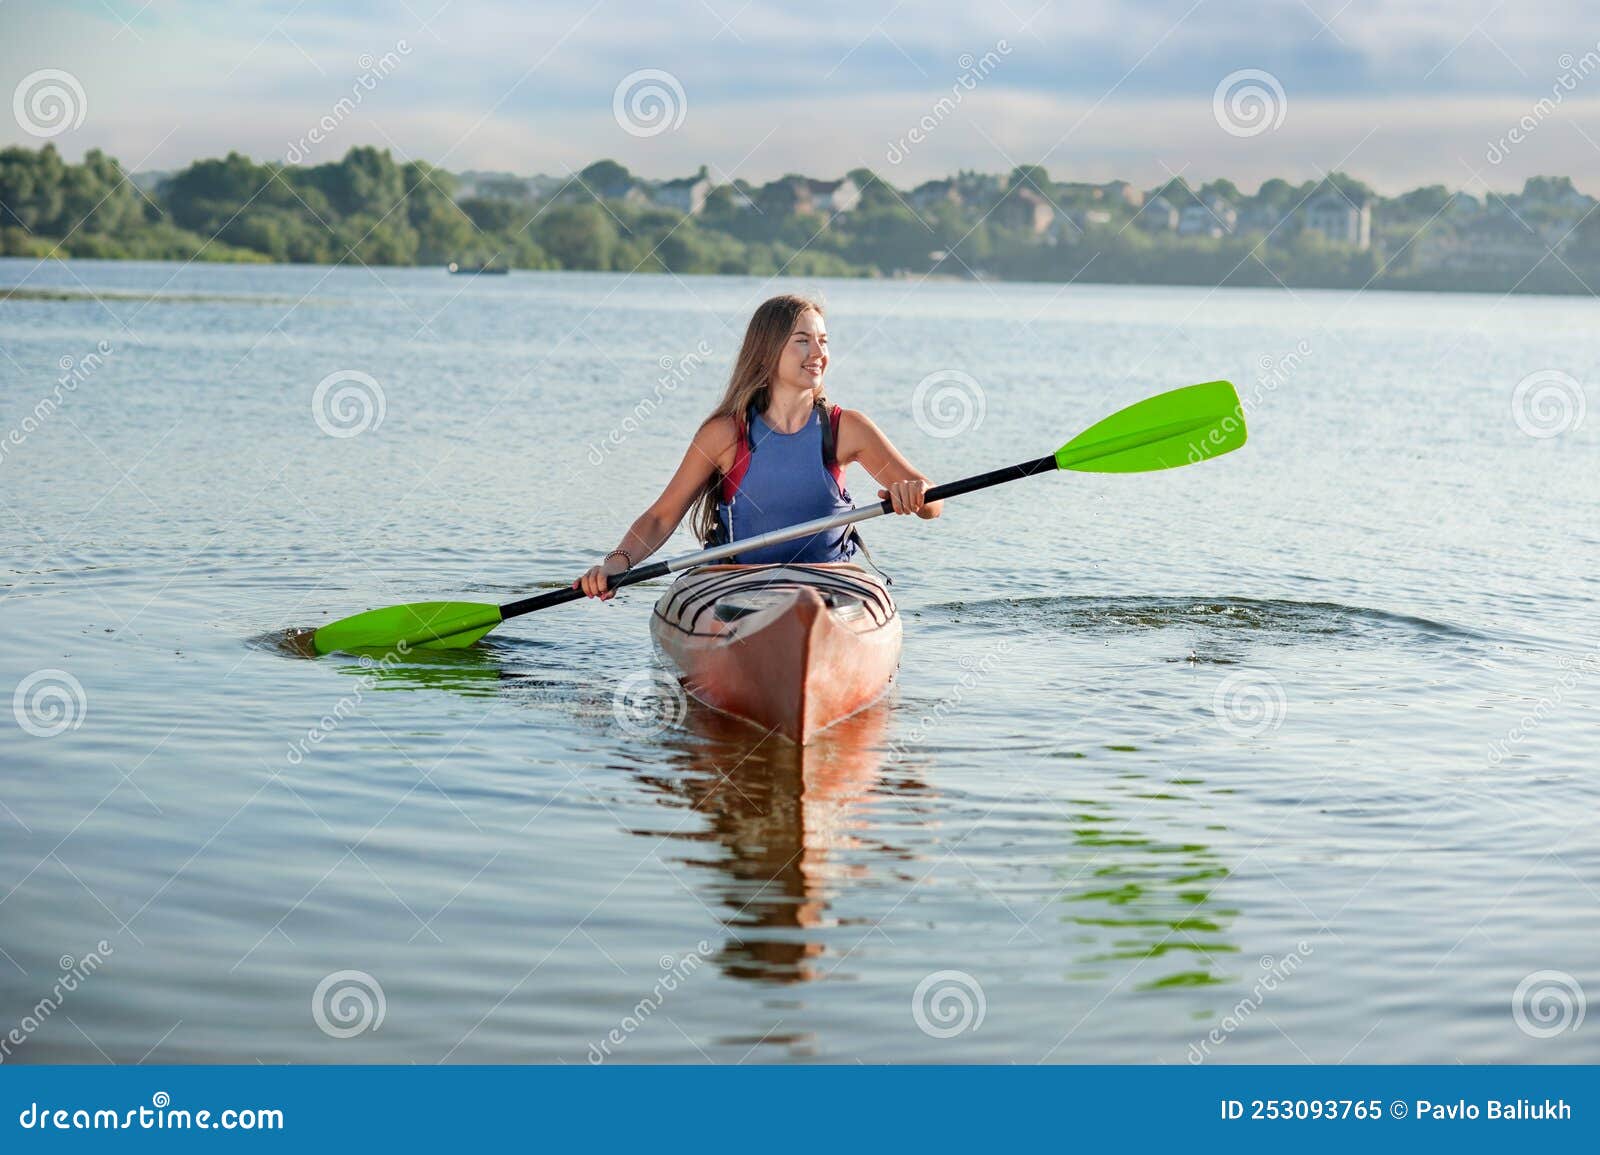 A Girl in a Canoe on a Water Excursion, Active Pastime Stock Image ...